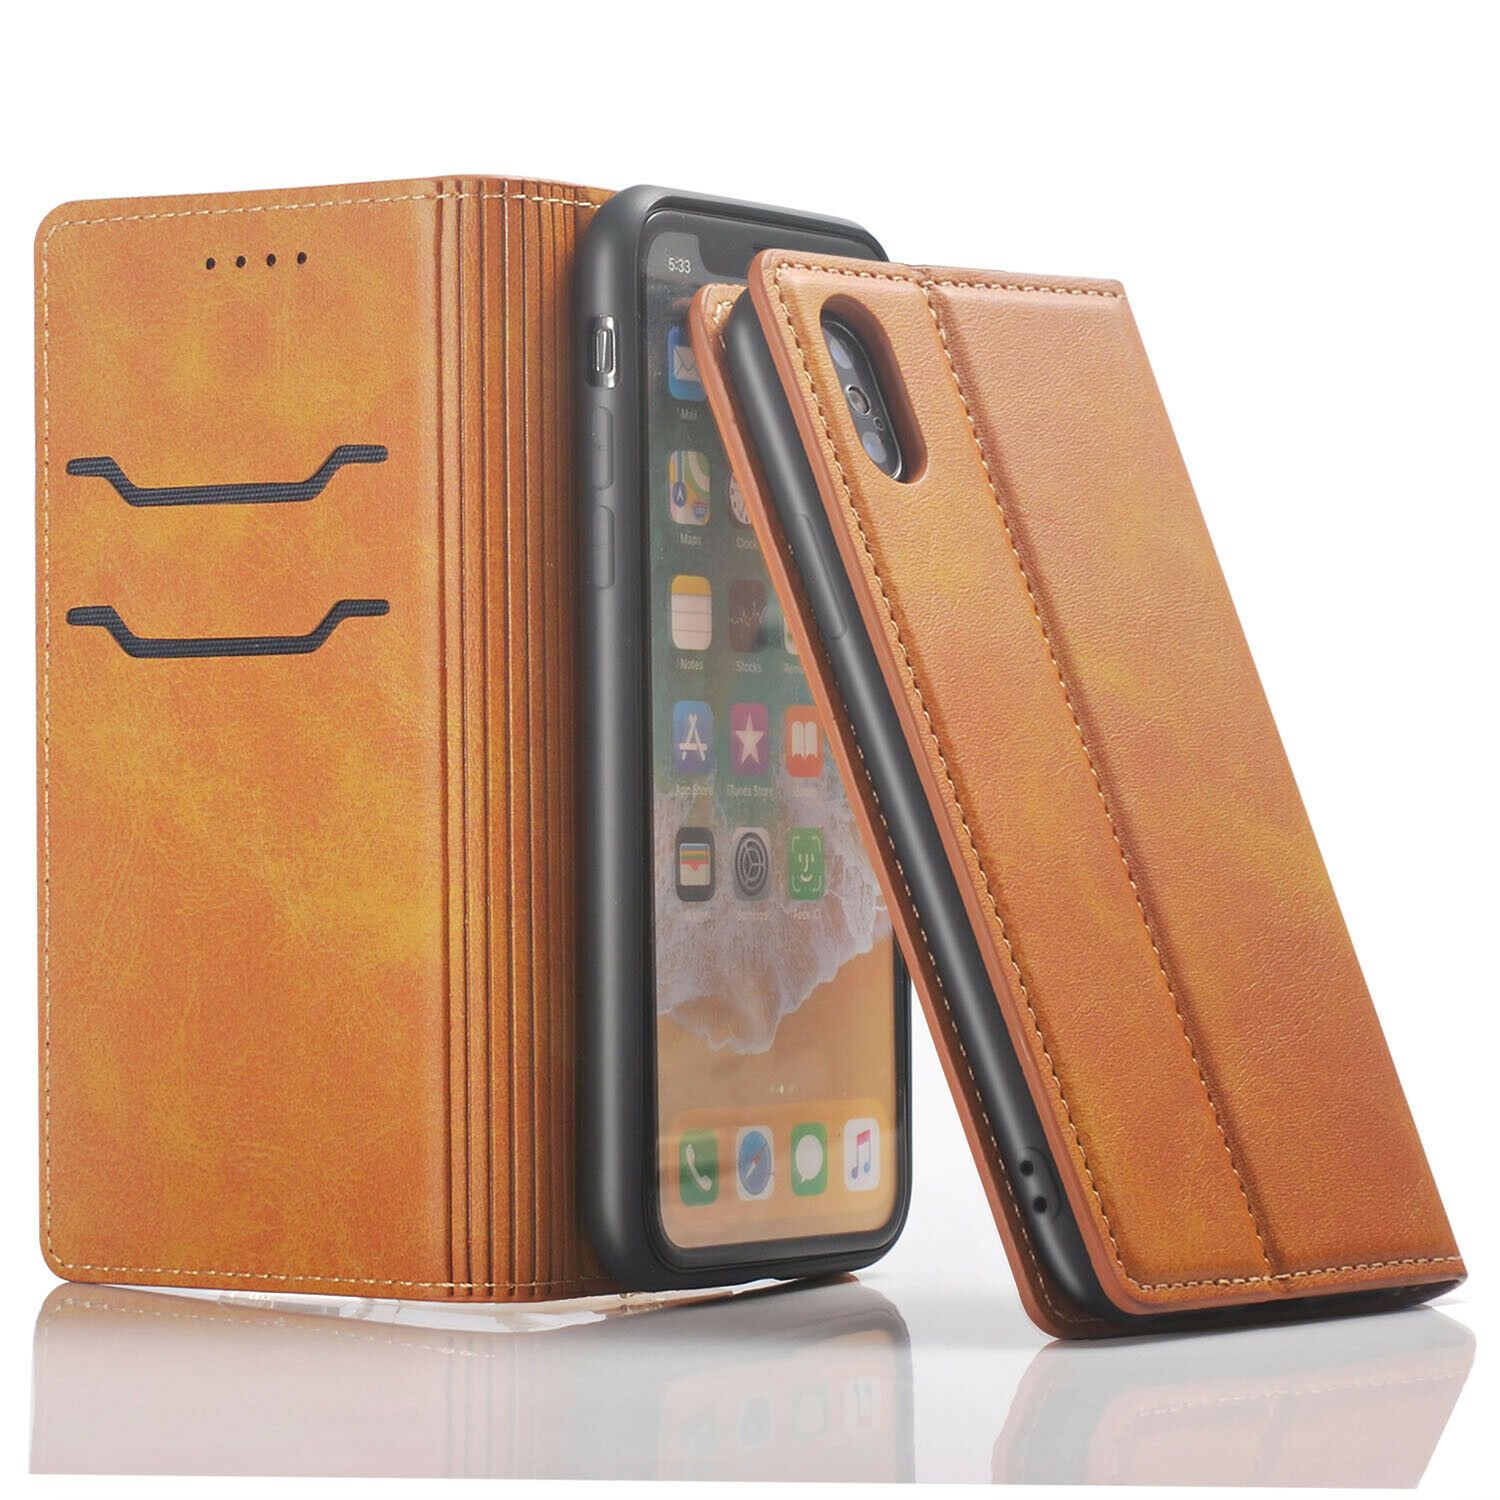 For iPhone 11 Pro XS MAX/ XR X 6 7 8 Plus Wallet Leather Case Card Holder Cover hotgadgetbayhotgadgetbay For iPhone X Brown-A Style 